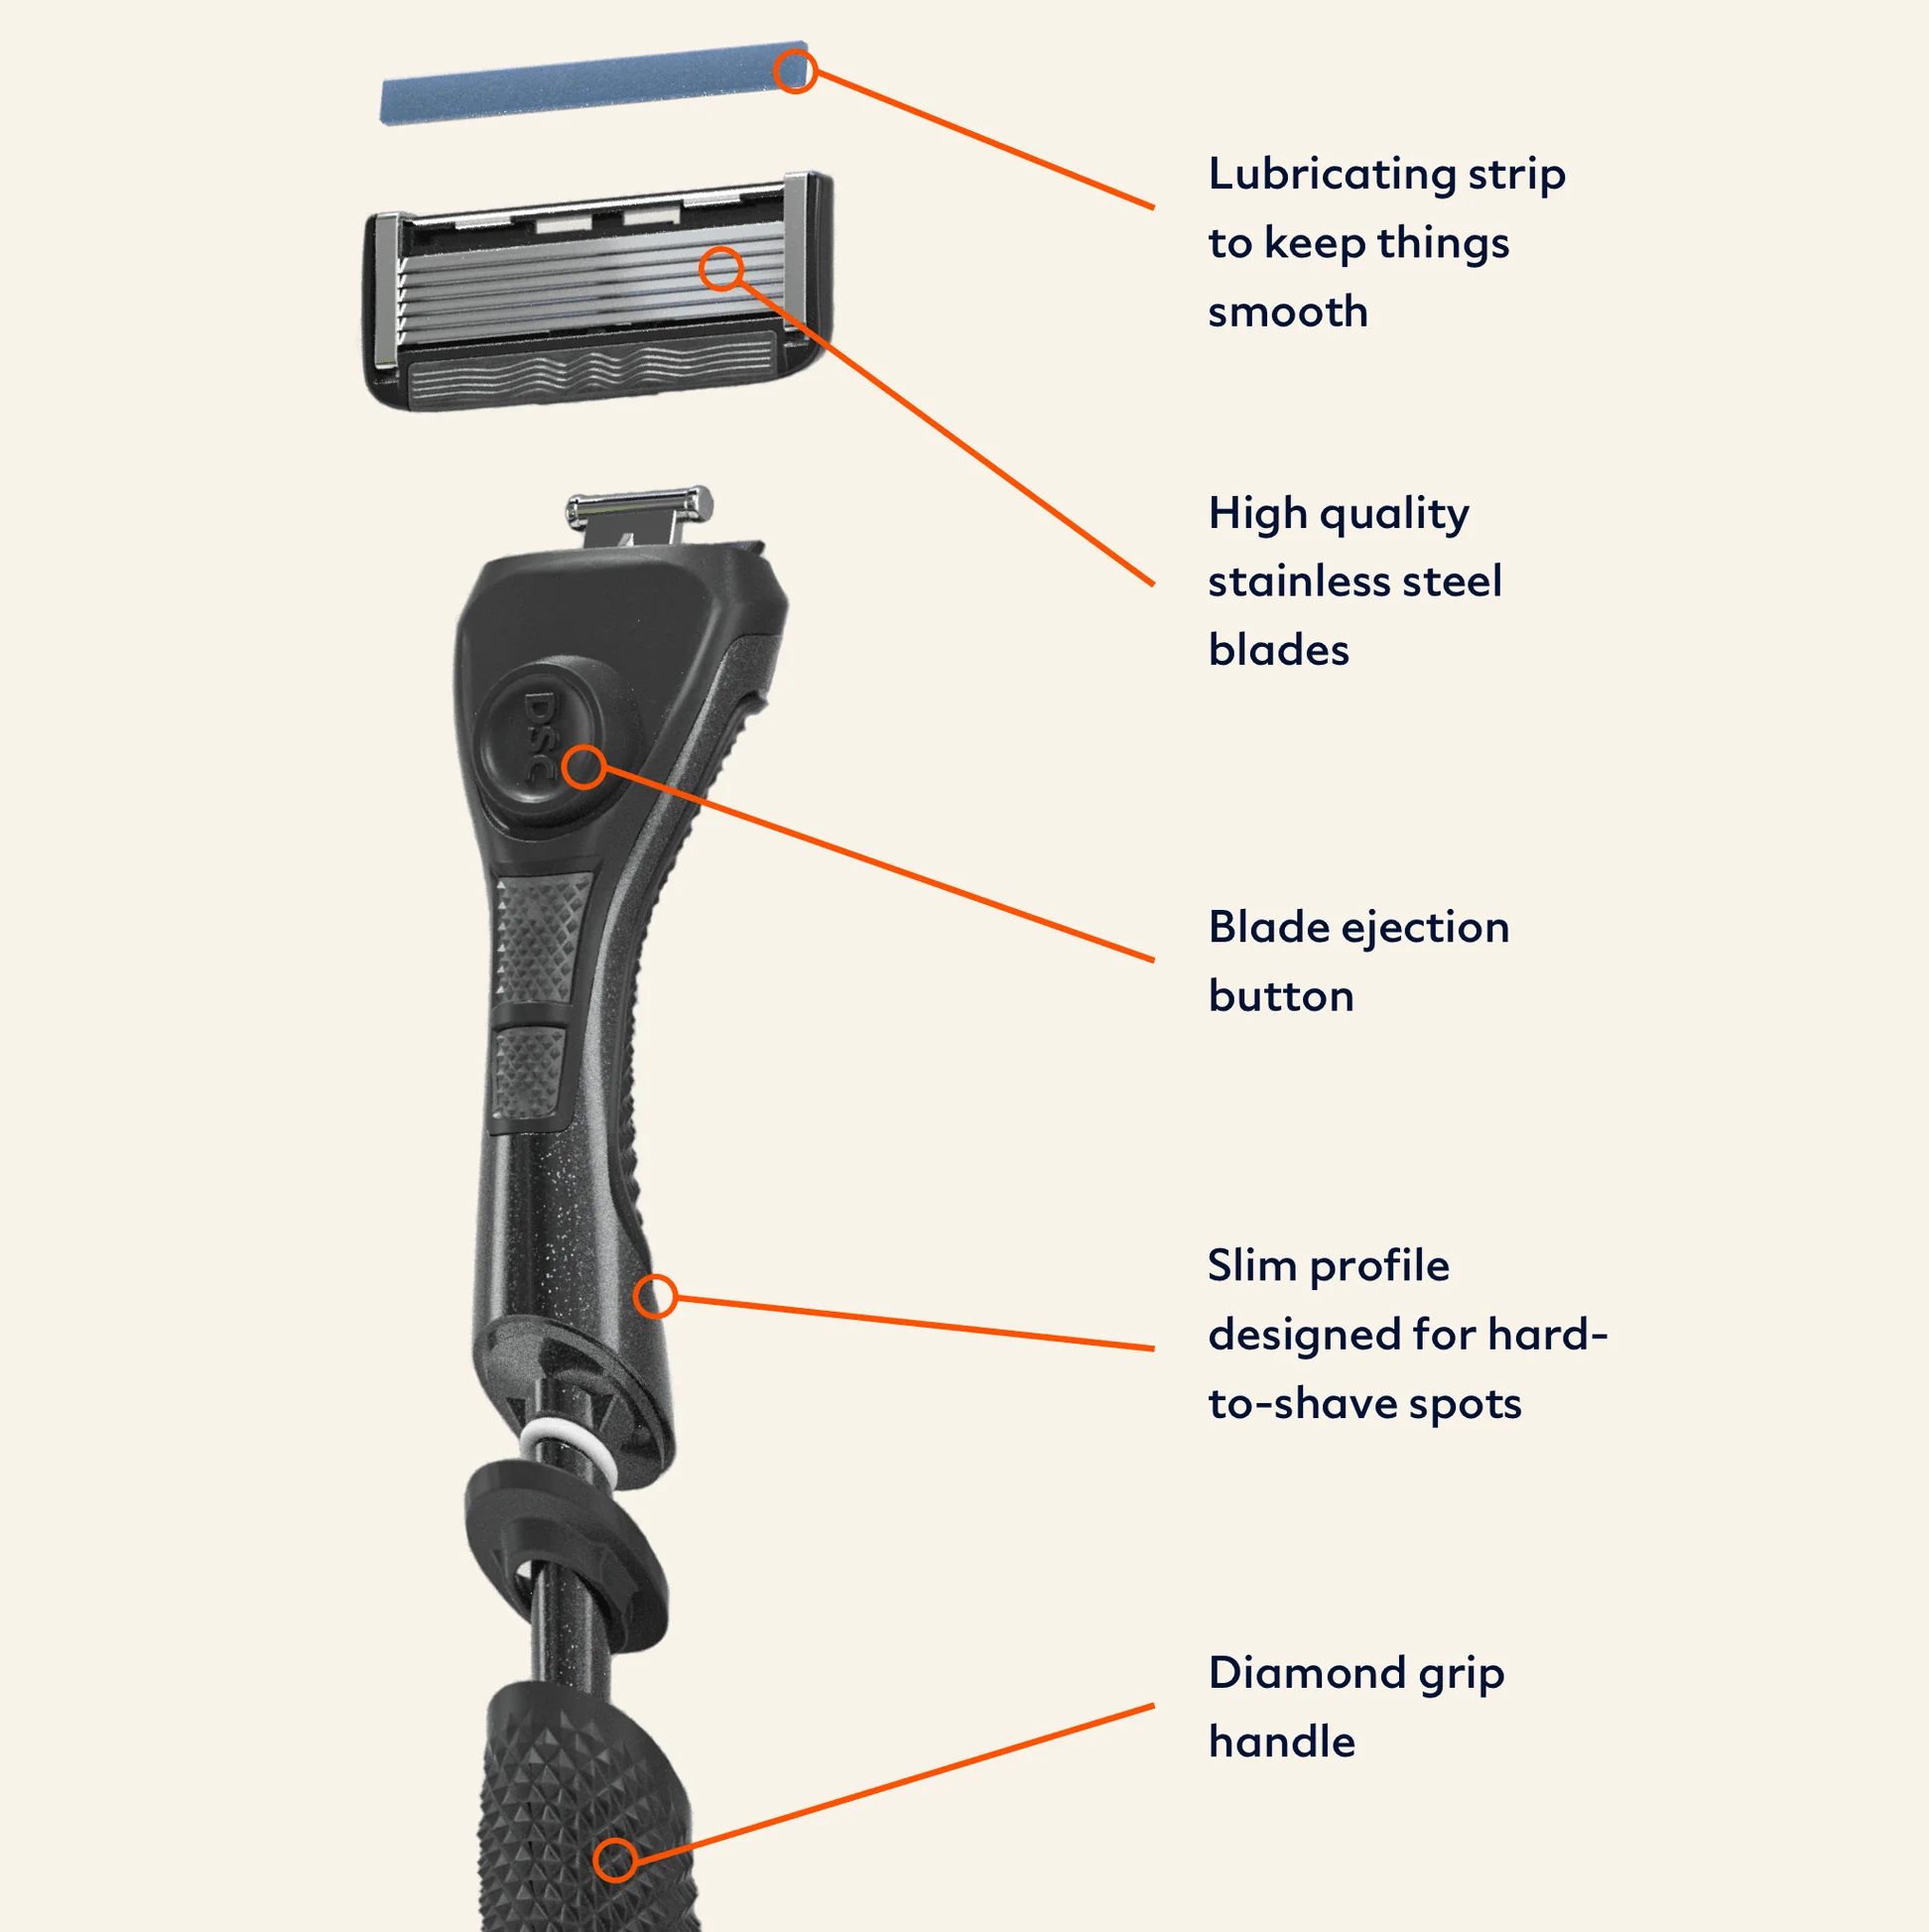 The 6 Blade Razor Includes a Diamond Grip Handle, High Quality Stainless Steel Blades, and a Lubricating Strip.